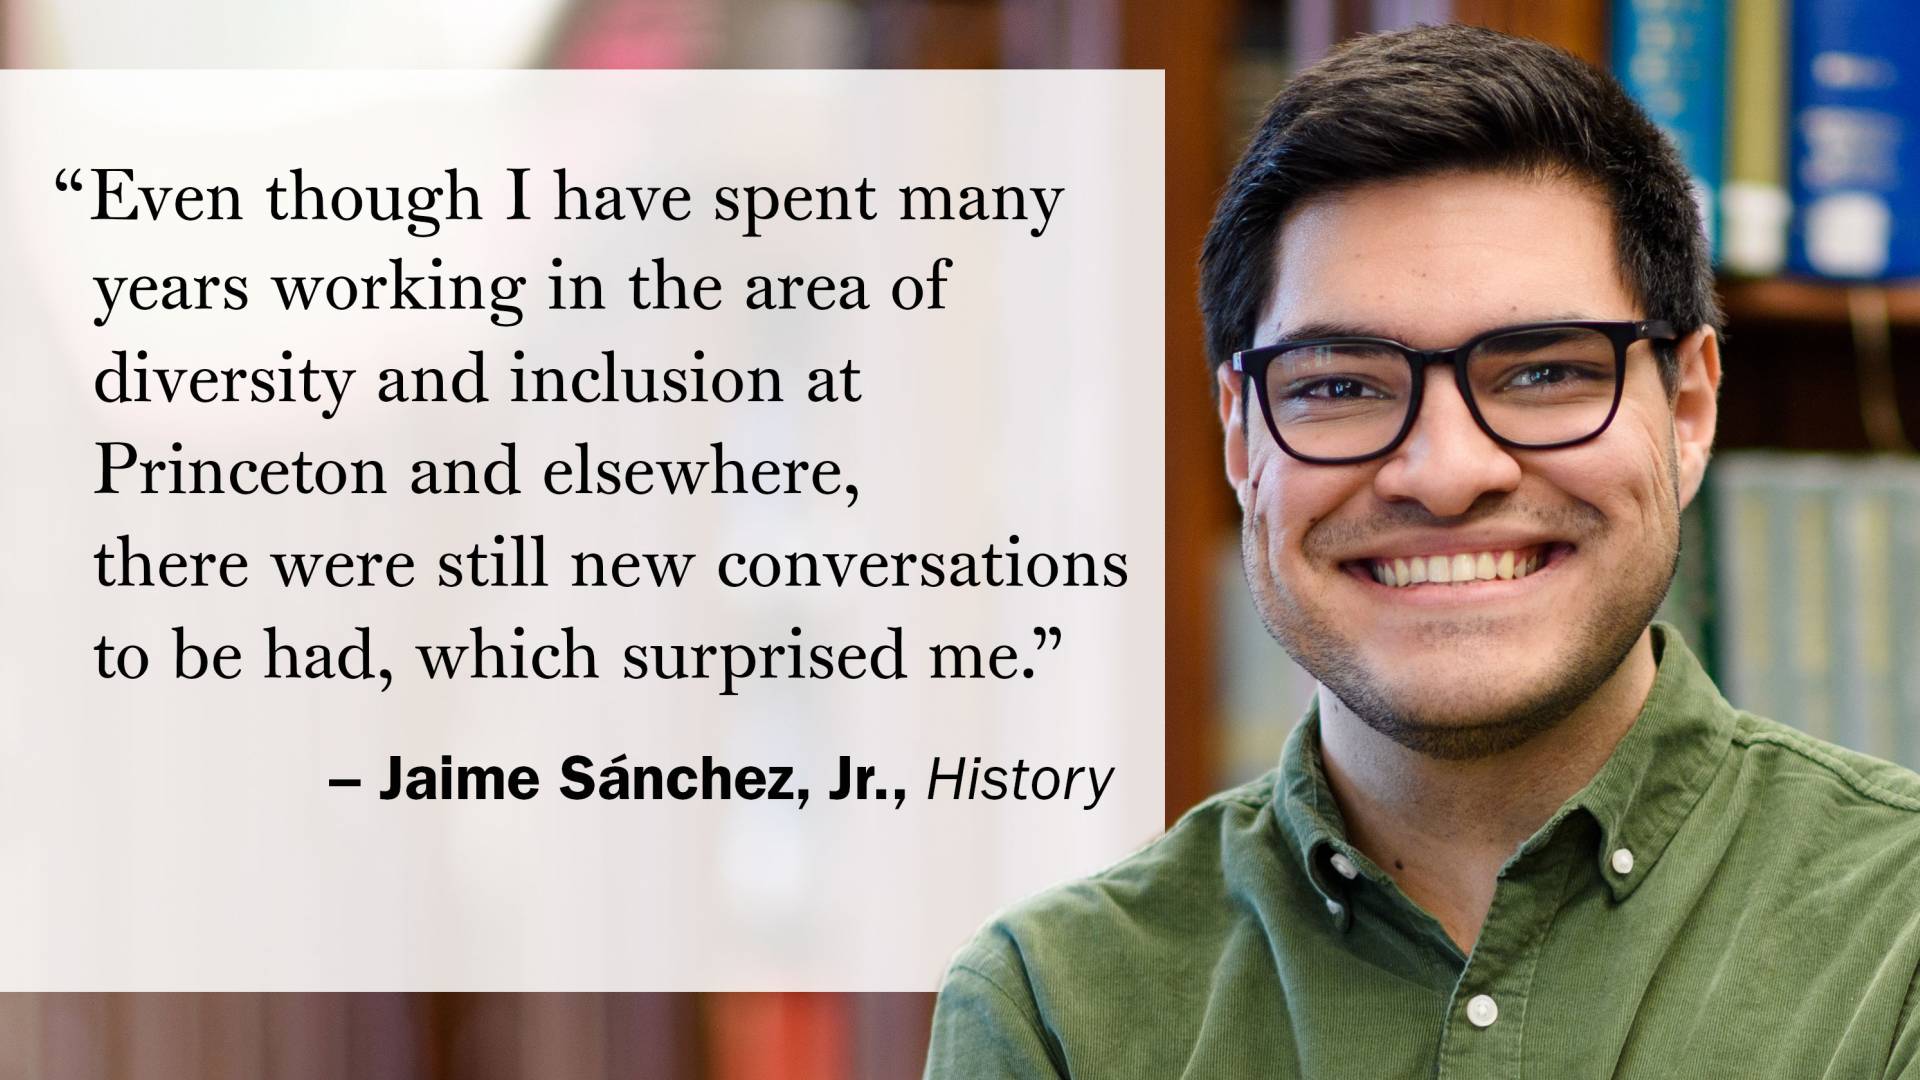 "Even though I have spent many years working in the area of diversity and inclusion at Princeton and elsewhere, there were still new conversations to be had, which surprised me." —Jaime Sánchez, Jr., History